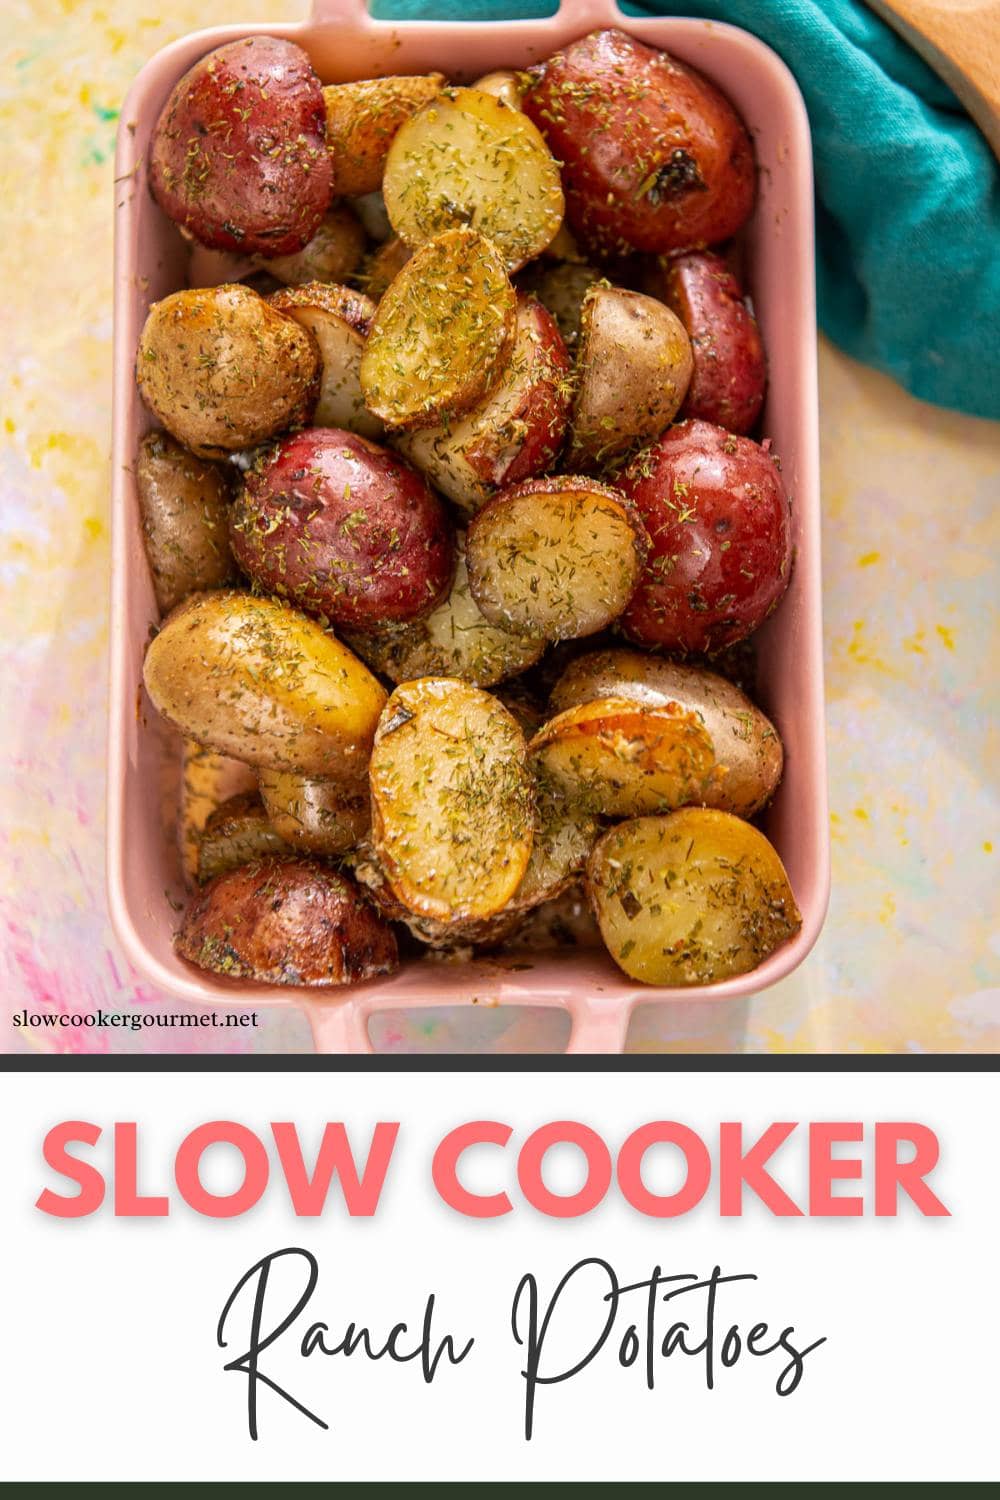 Slow Cooker Ranch Chicken and Red Potatoes - The Magical Slow Cooker